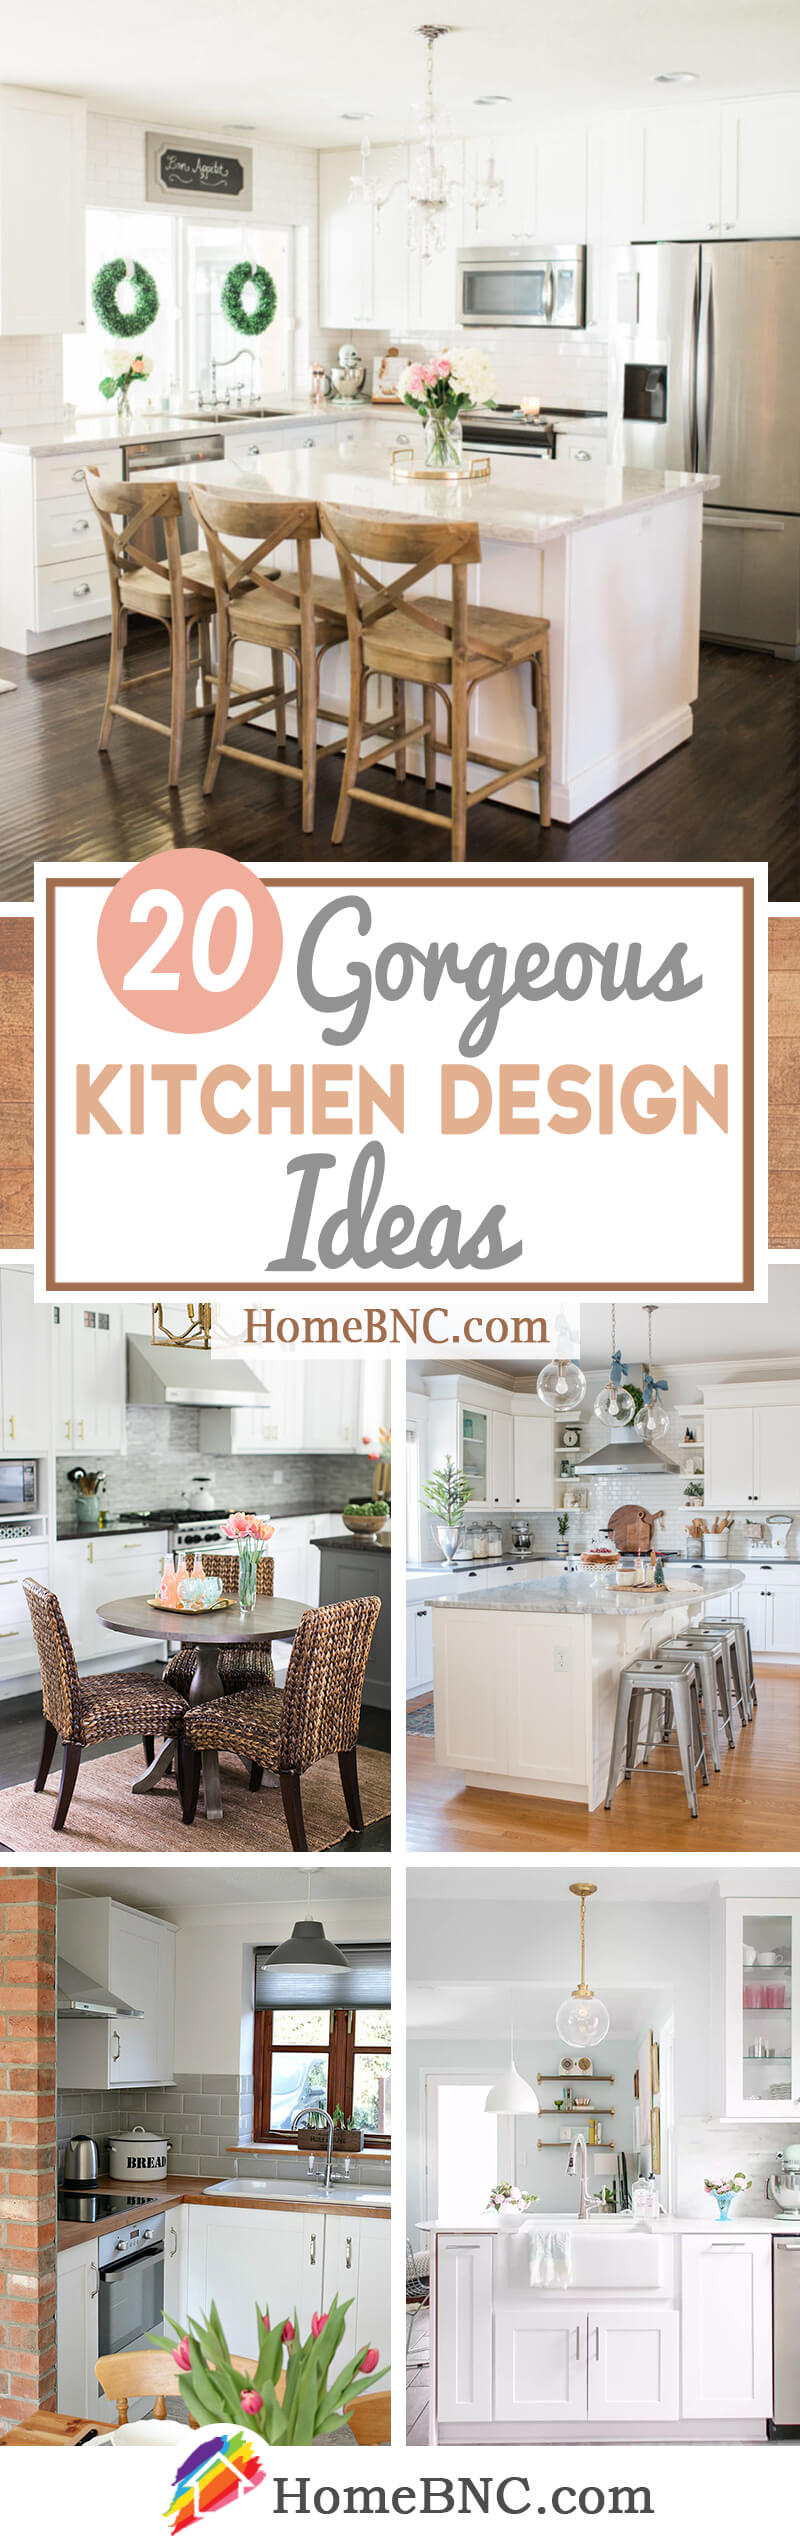 20 Best Kitchen Design Ideas and Decorations for 20